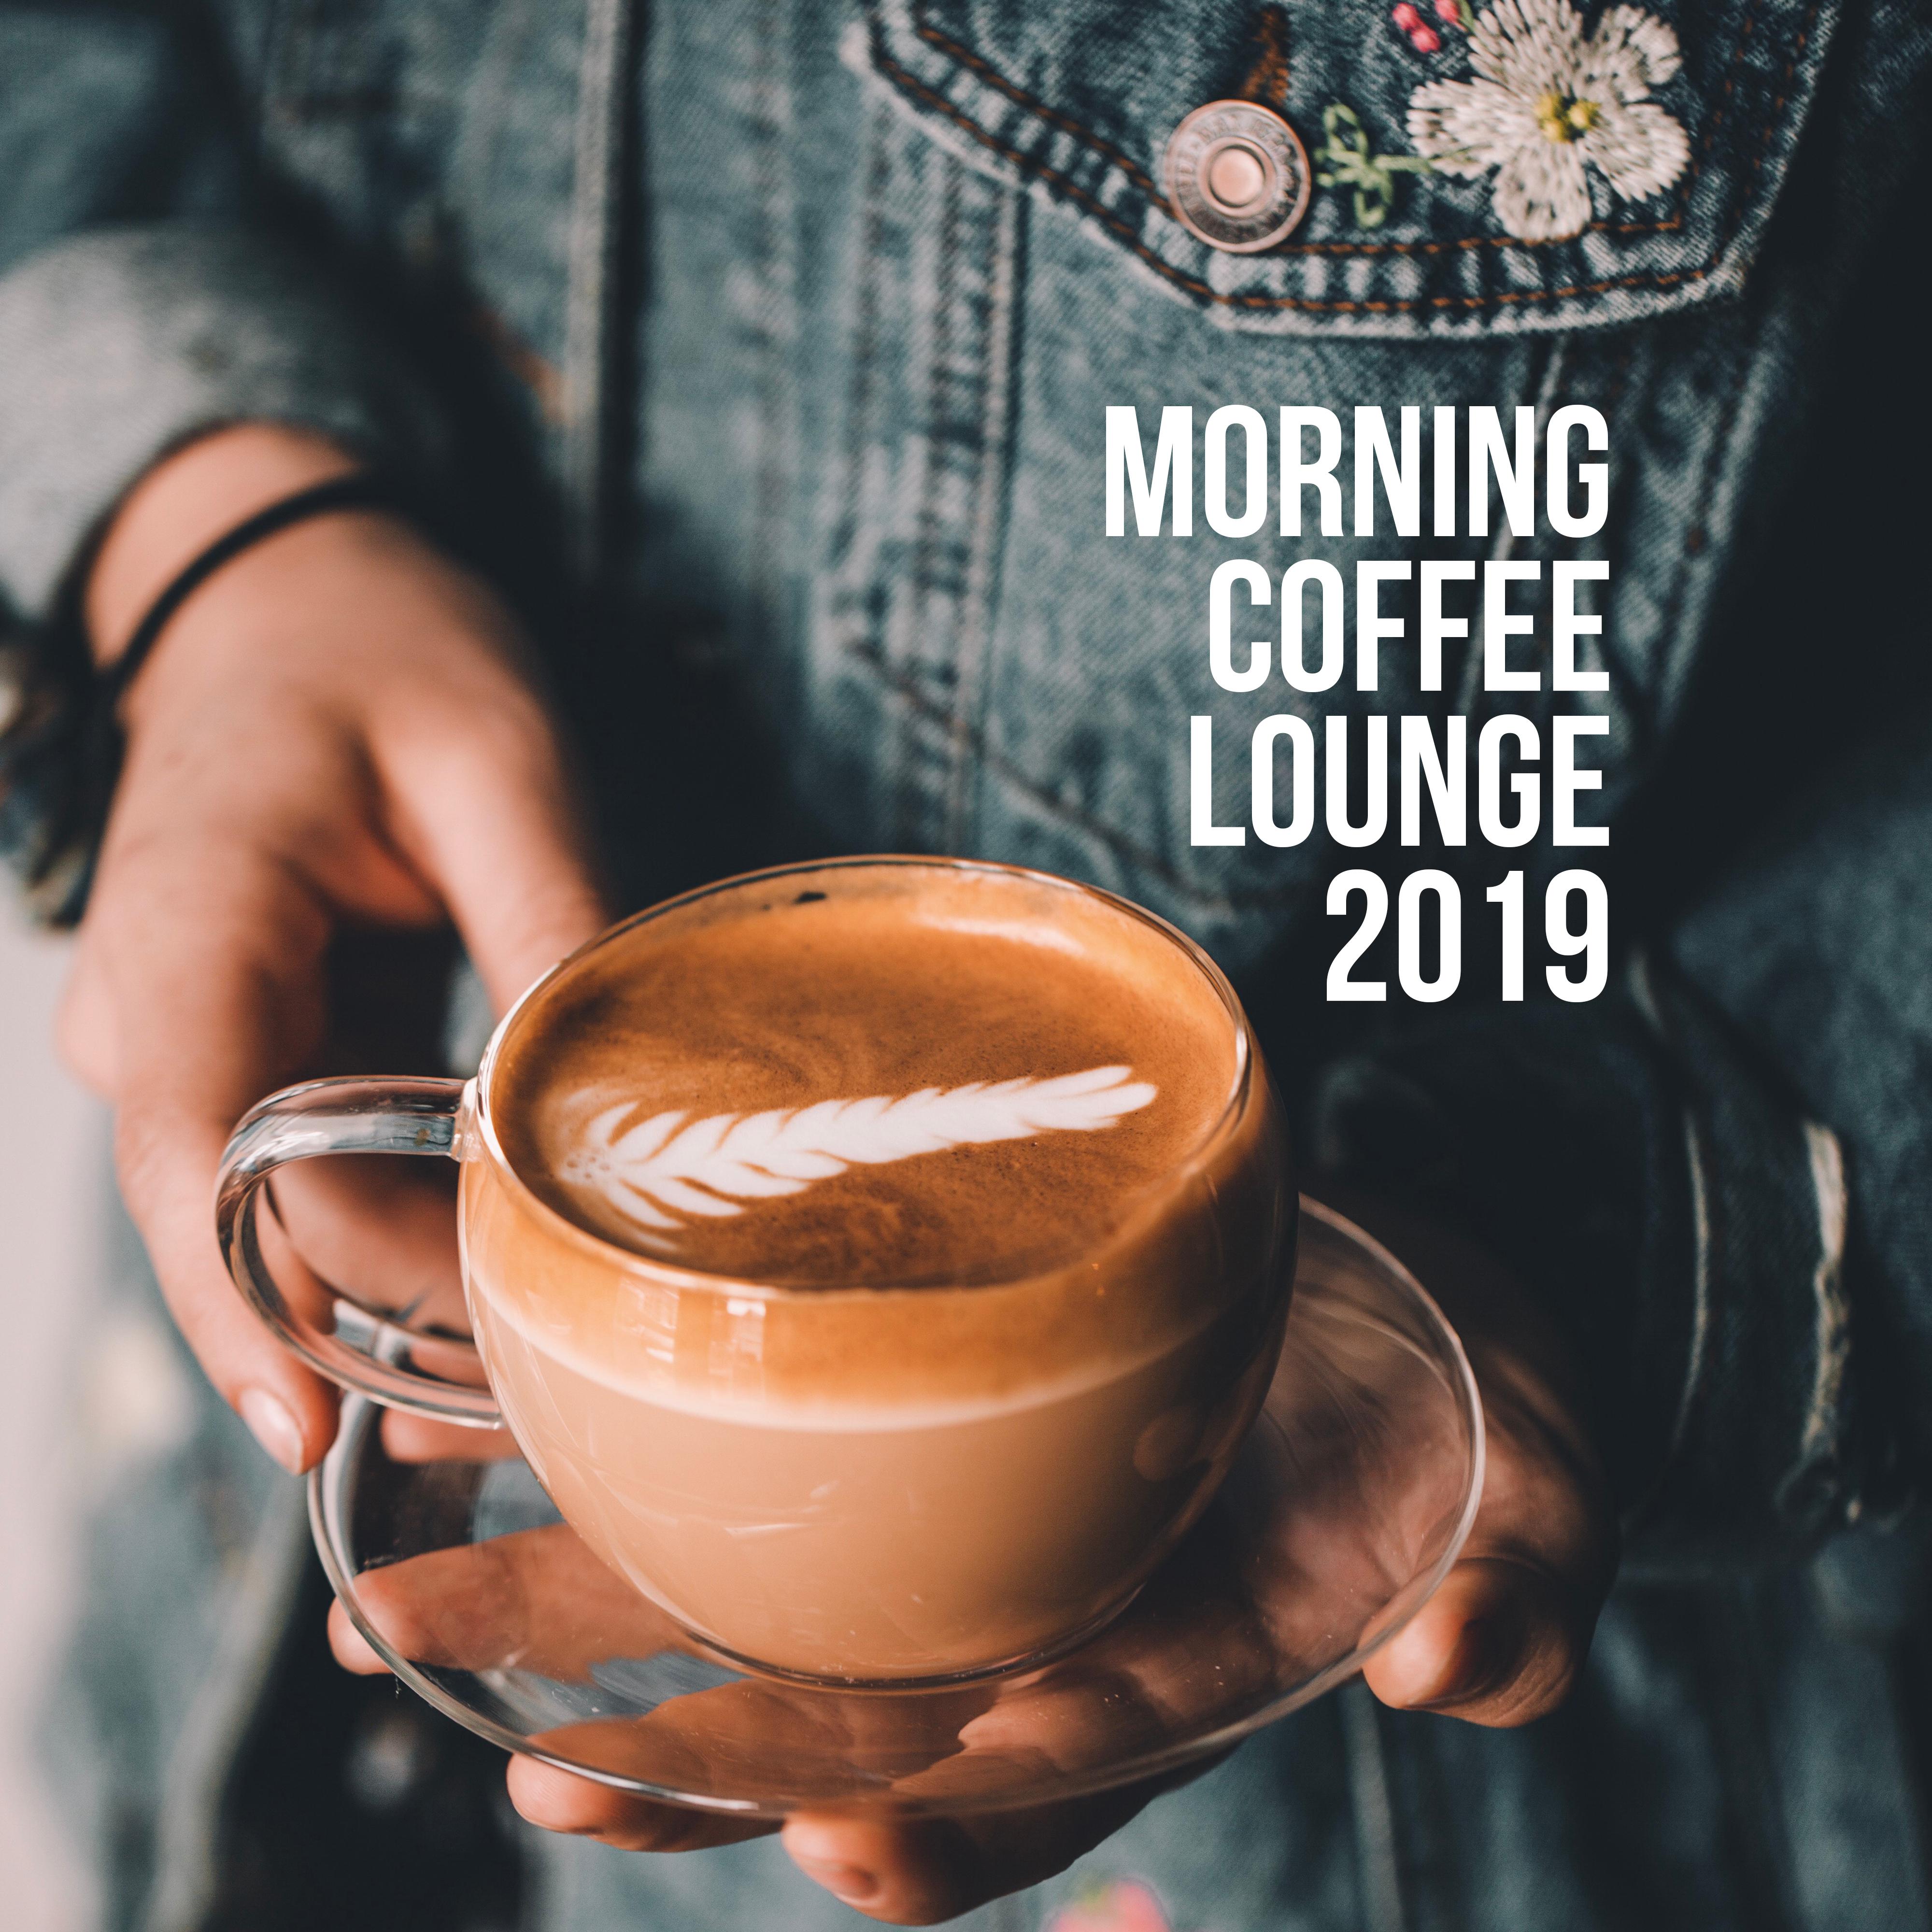 Morning Coffee Lounge 2019: Jazz Relaxation, Instrumental Jazz Music Ambient